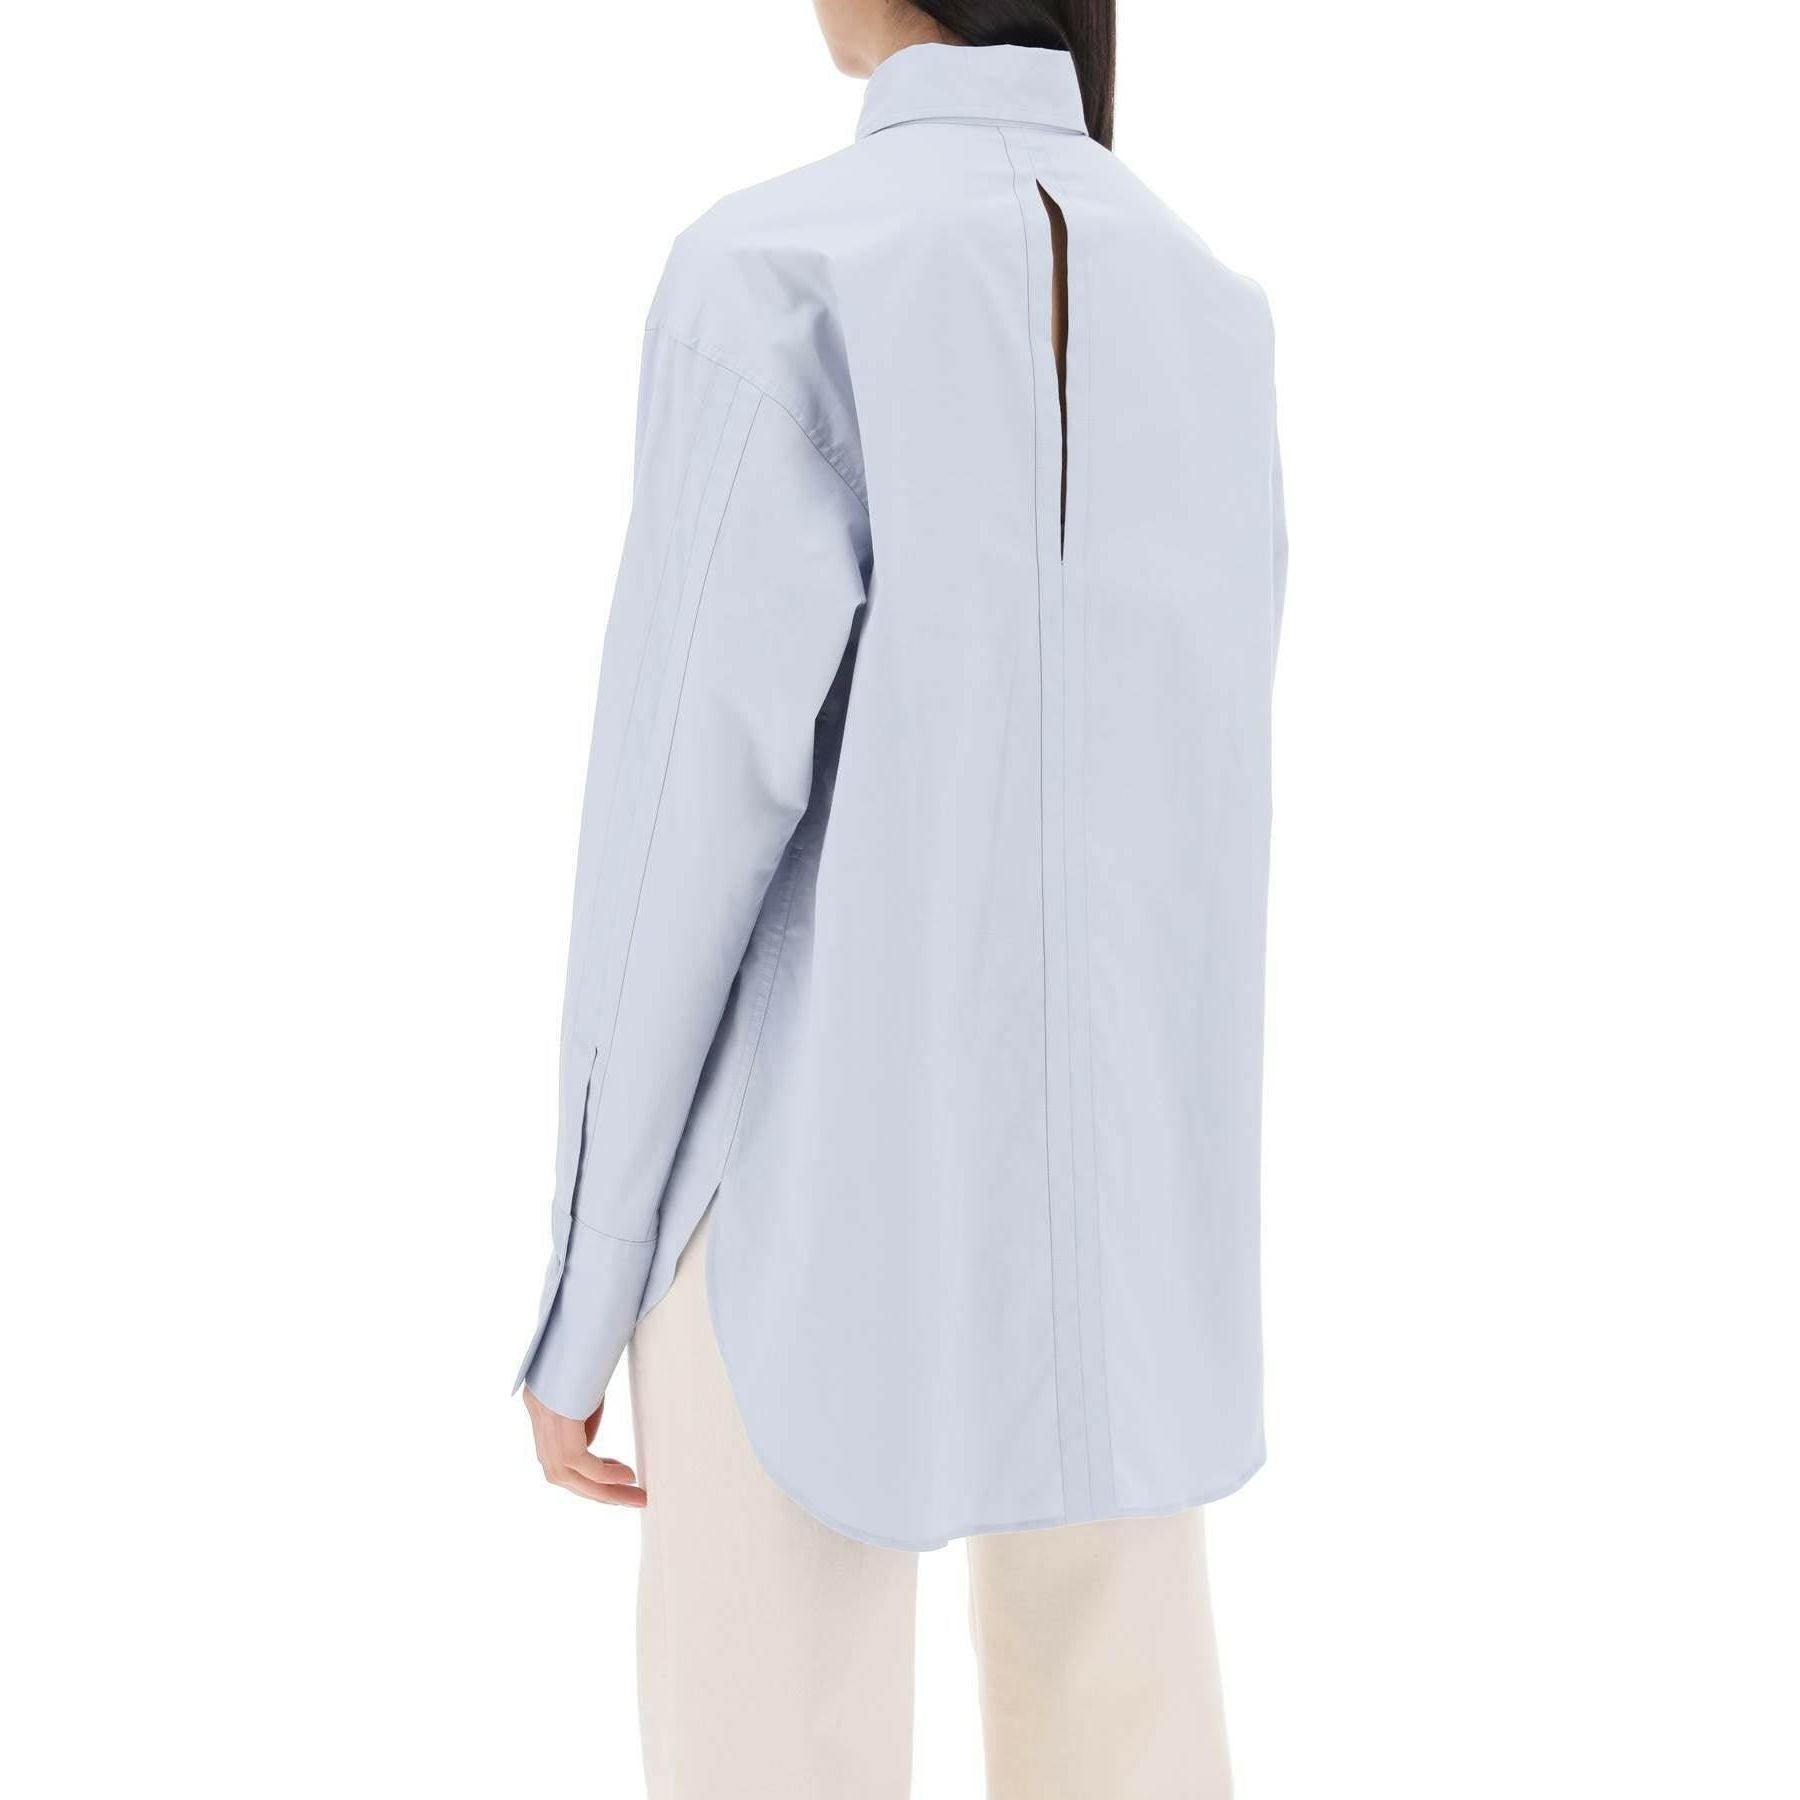 Relaxed Fit Shirt with Open Back Detail CLOSED JOHN JULIA.